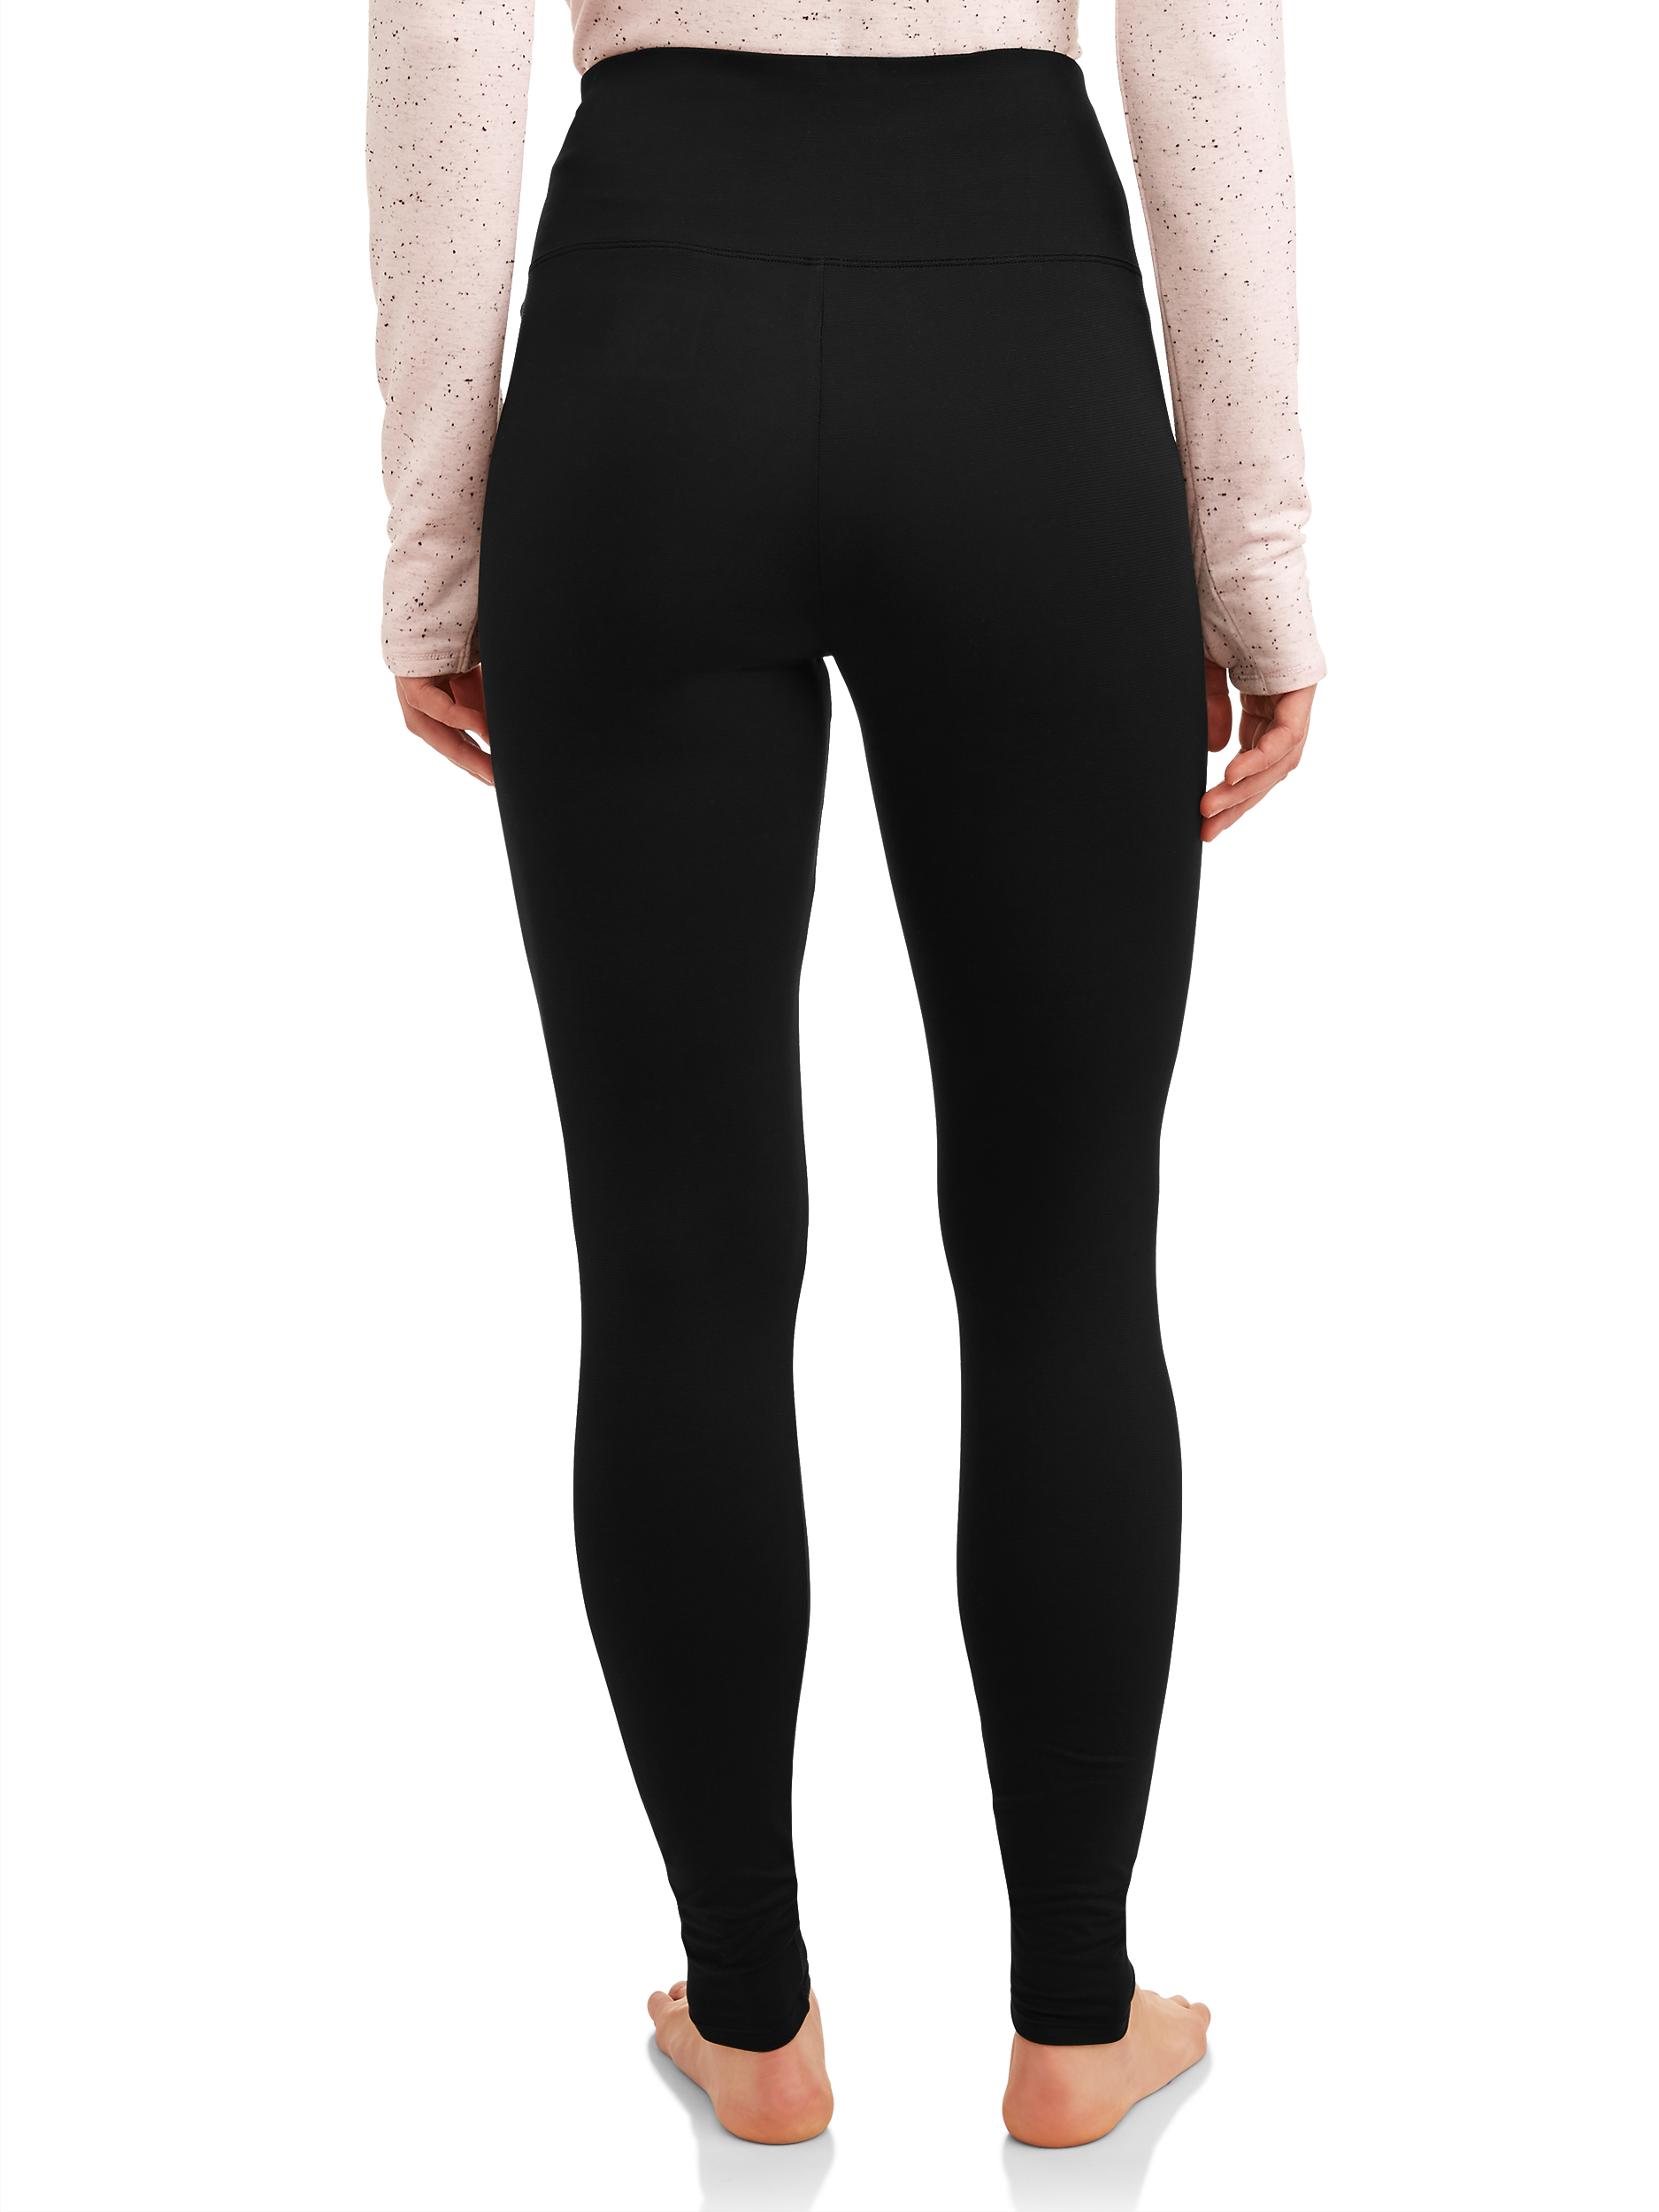 ClimateRight by Cuddl Duds Women's and Women's Plus Far Infrared Warm Long Underwear Legging - image 3 of 5